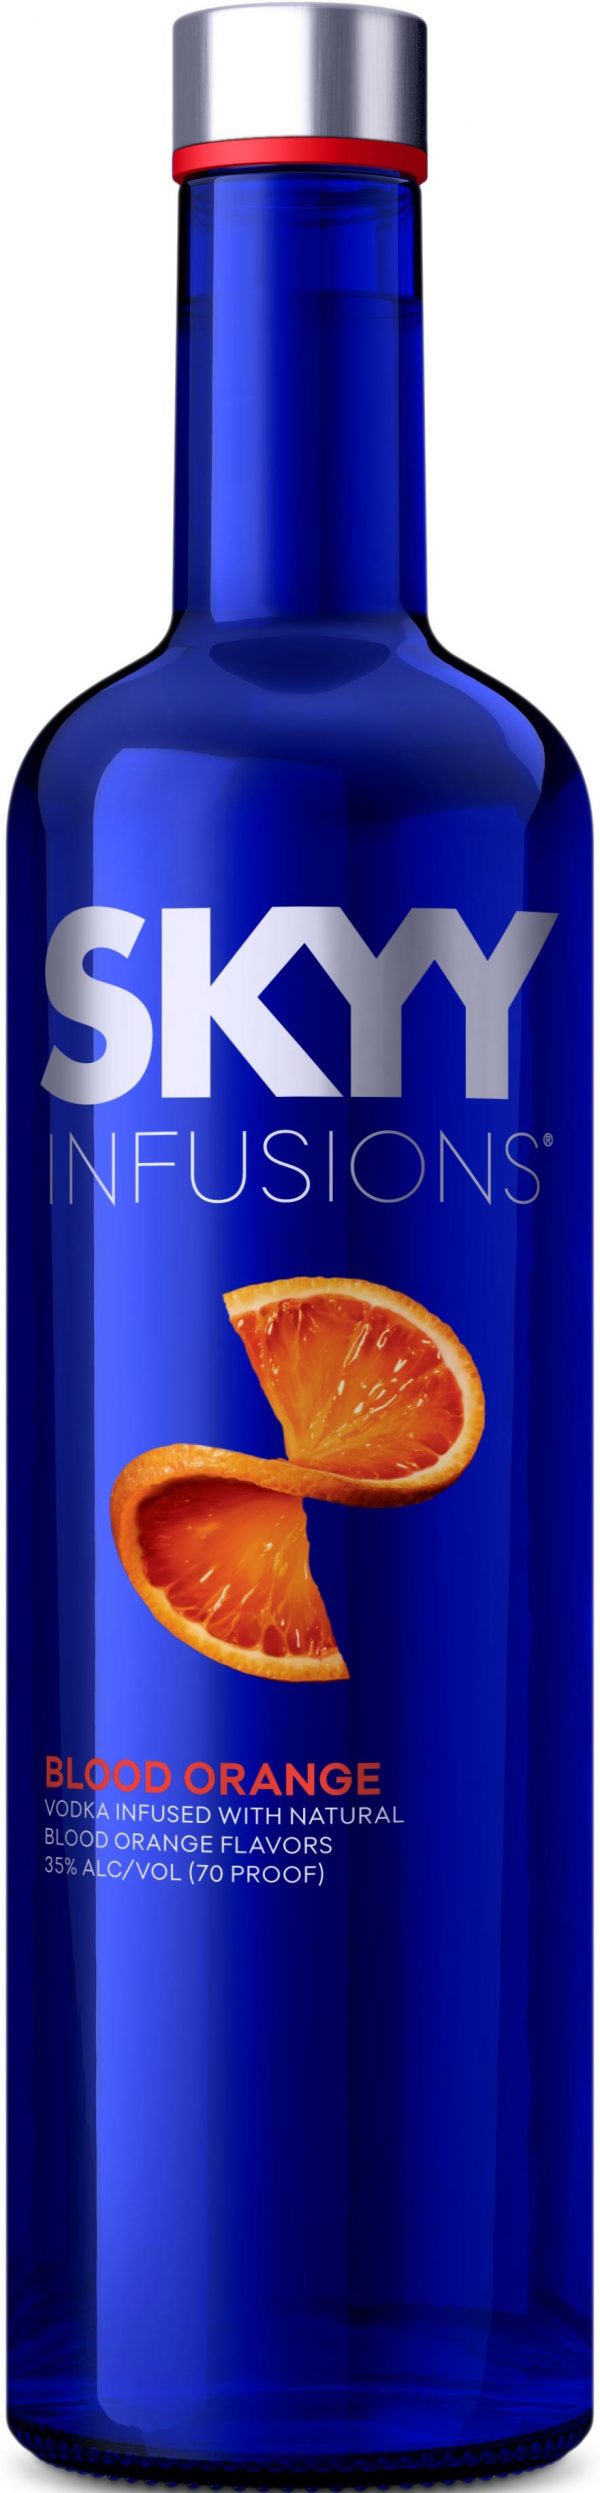 Zoom to enlarge the Skyy Infusions Blood Orange Vodka